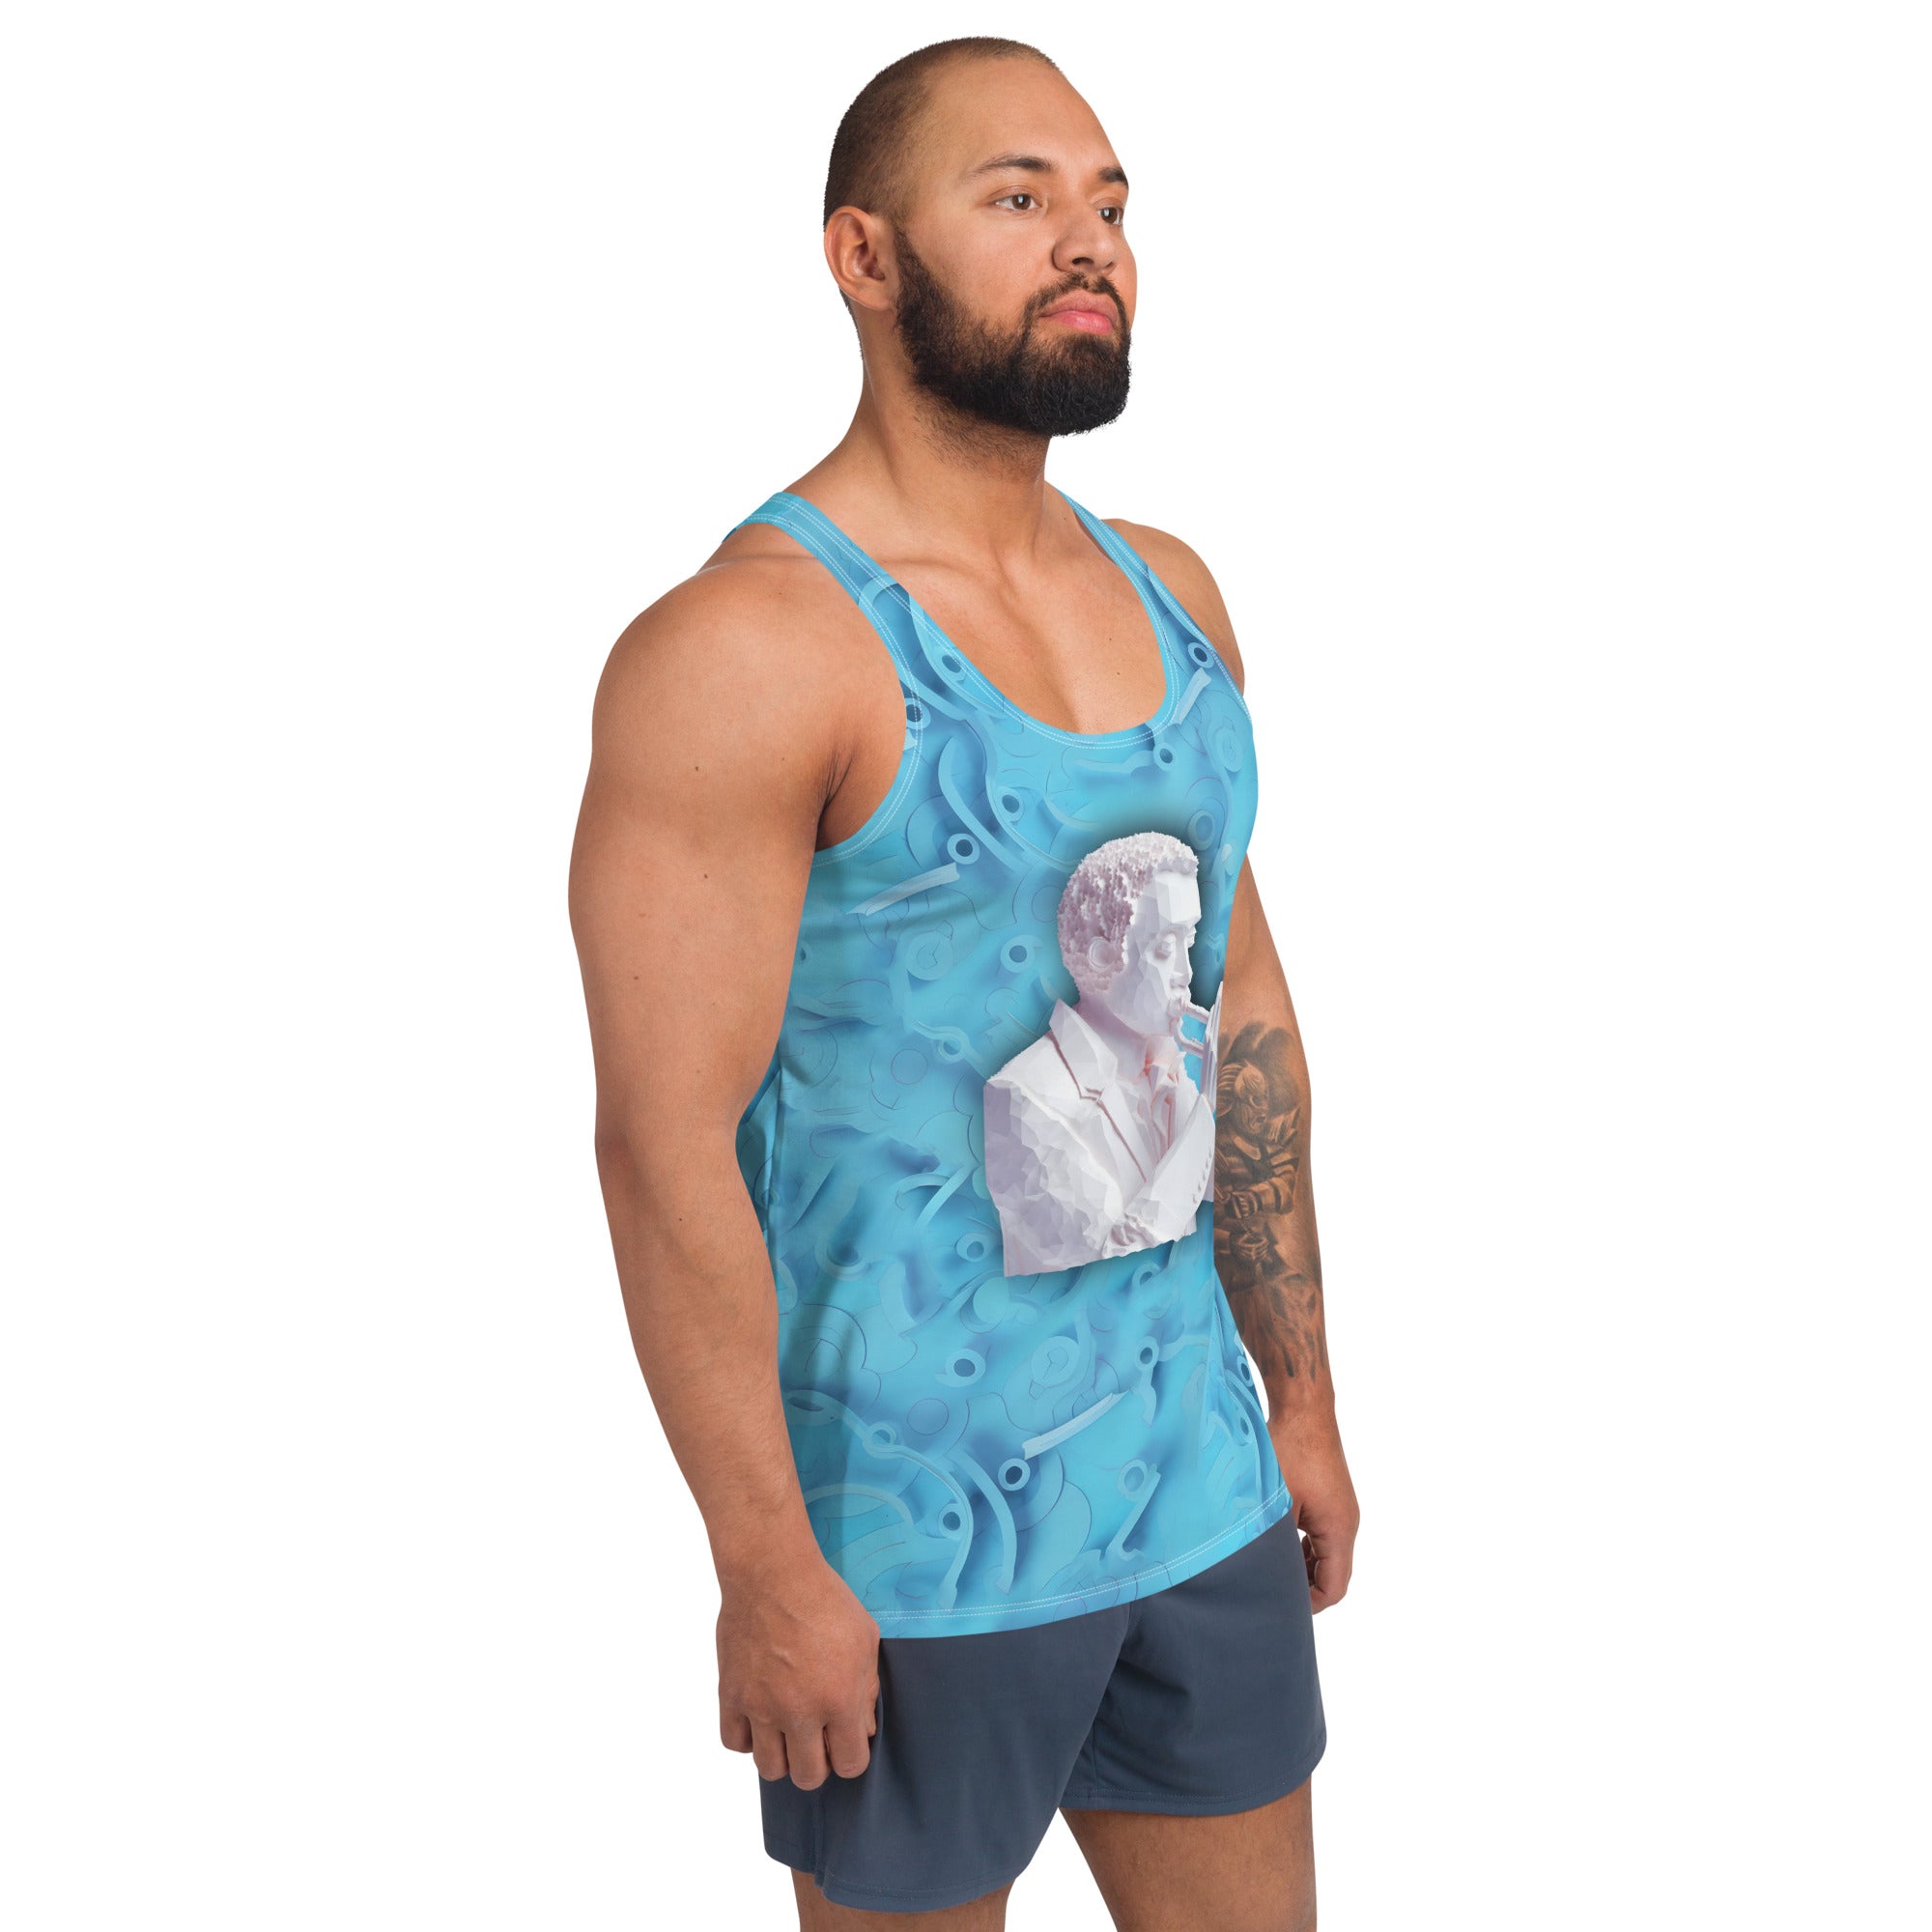 Rock Anthem Men's Tank Top lifestyle shot, paired with jeans.